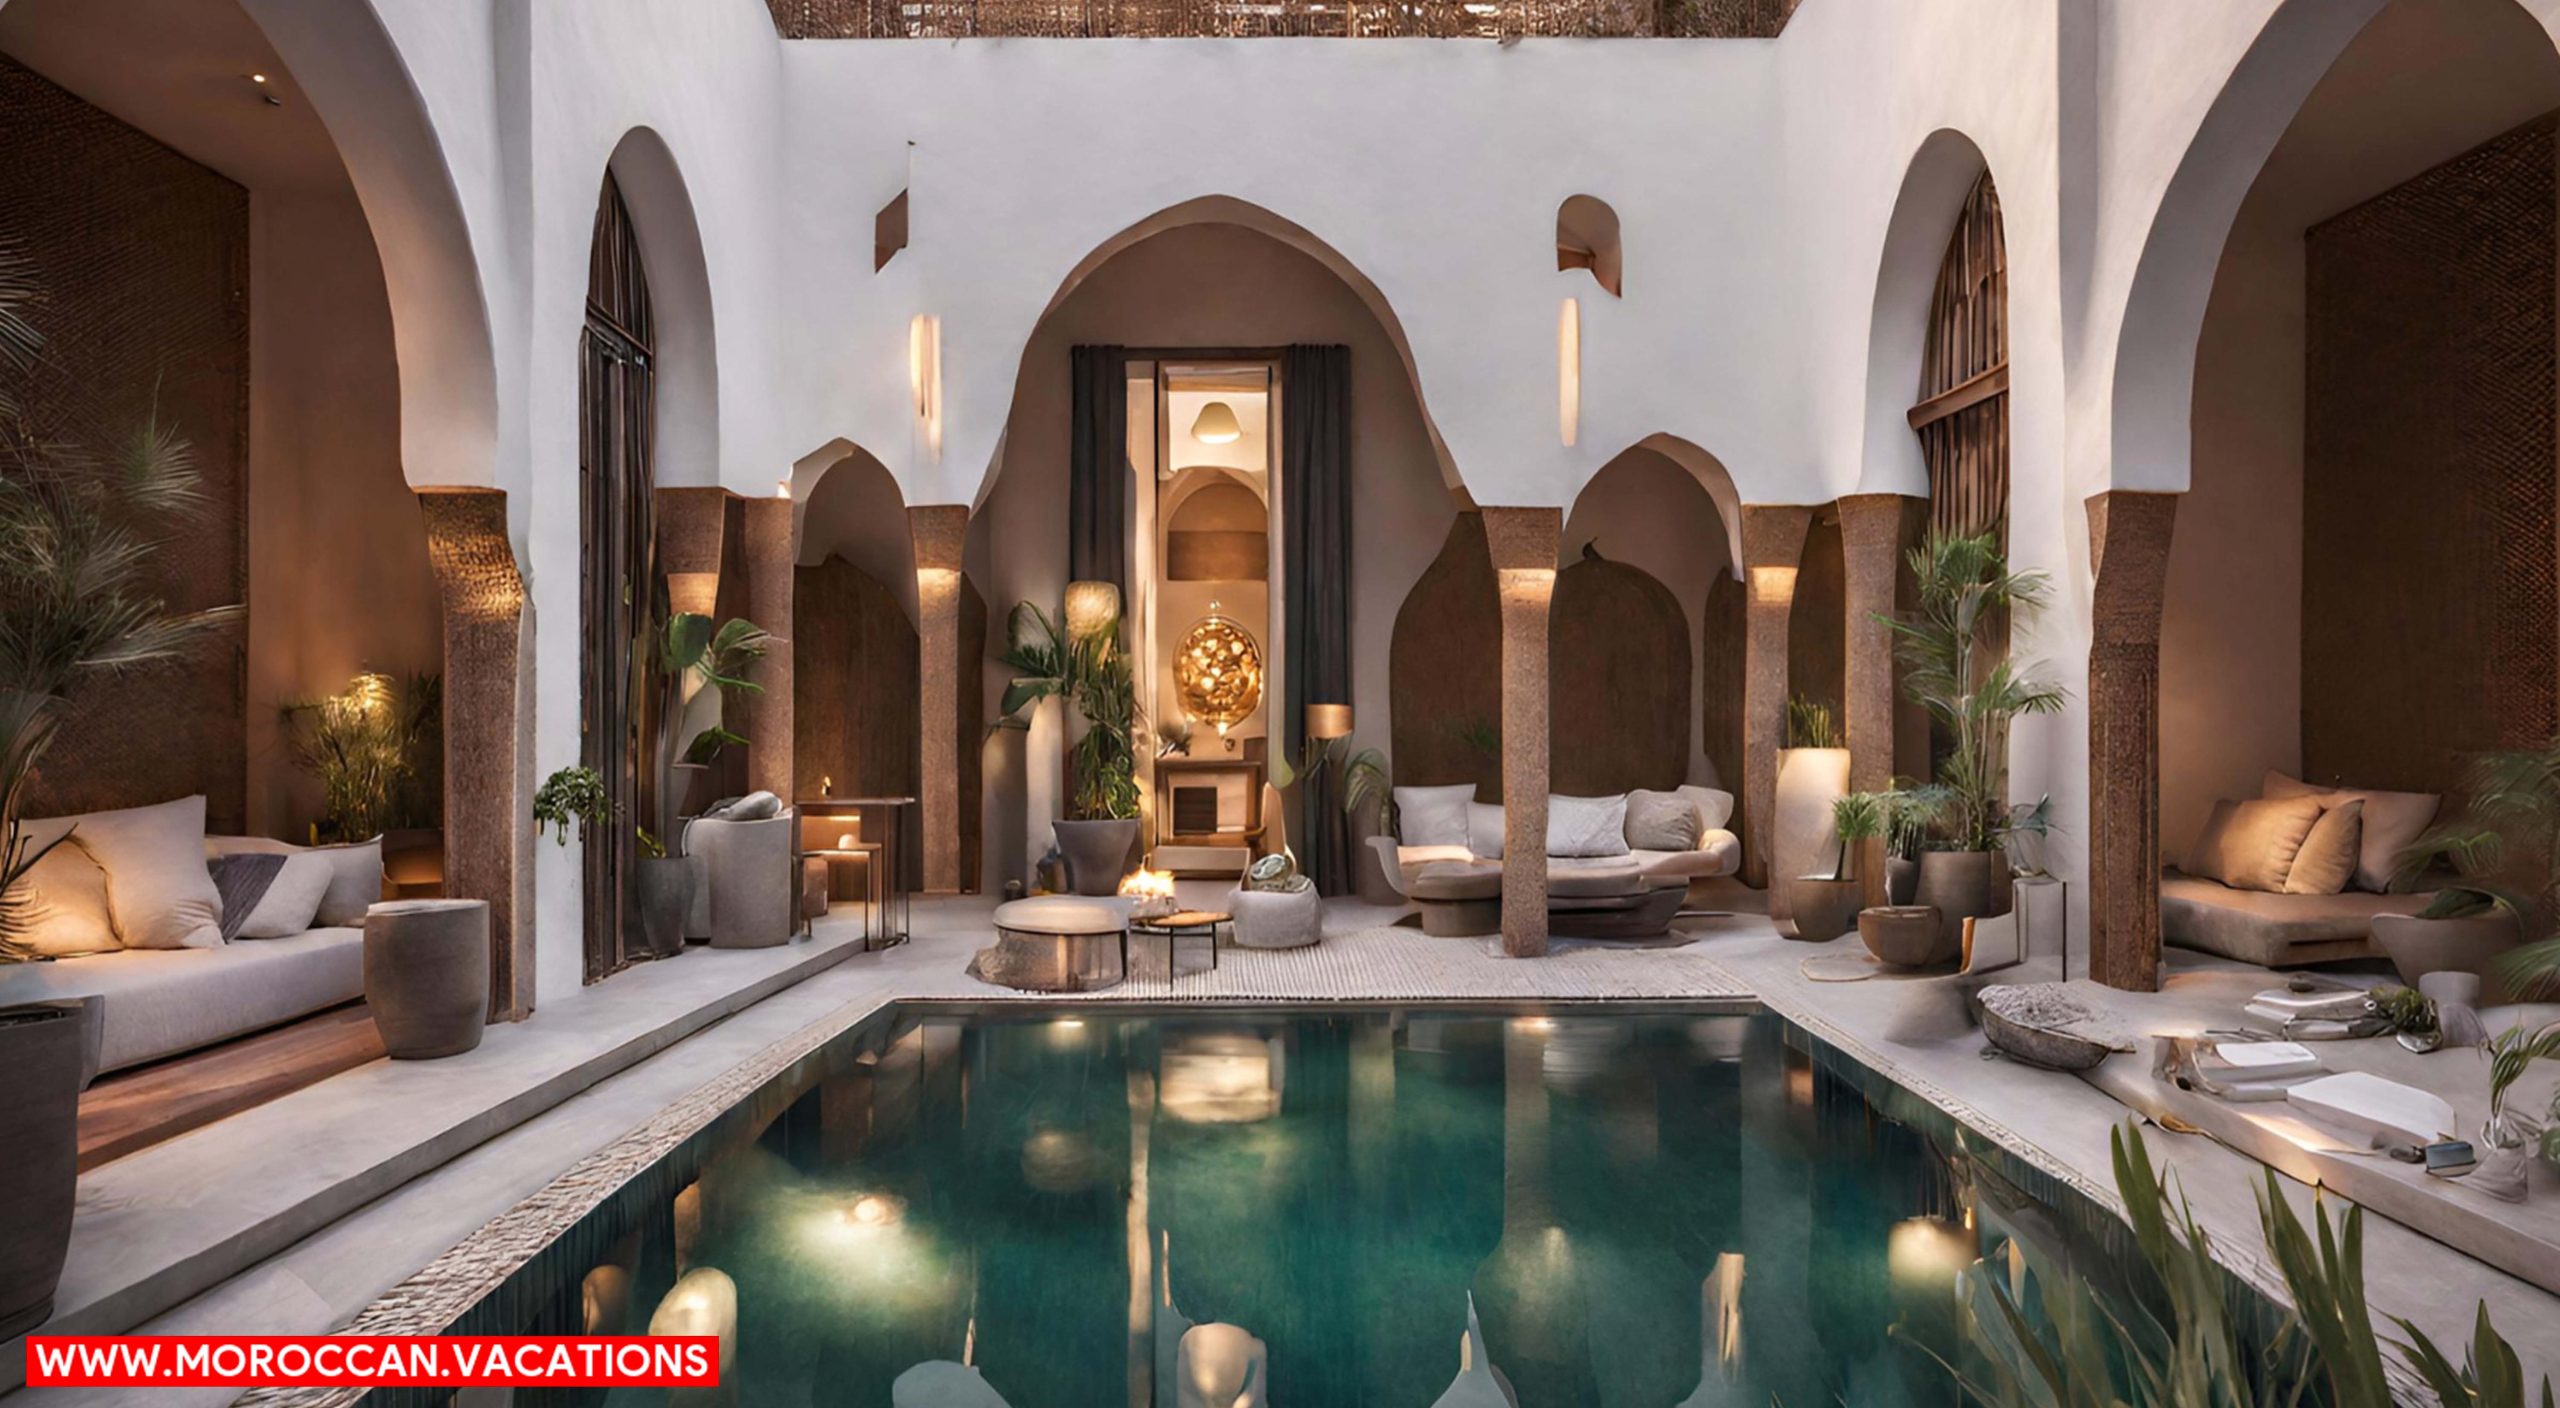 A modern, sustainable riad nestled amidst the bustling streets of Marrakesh.